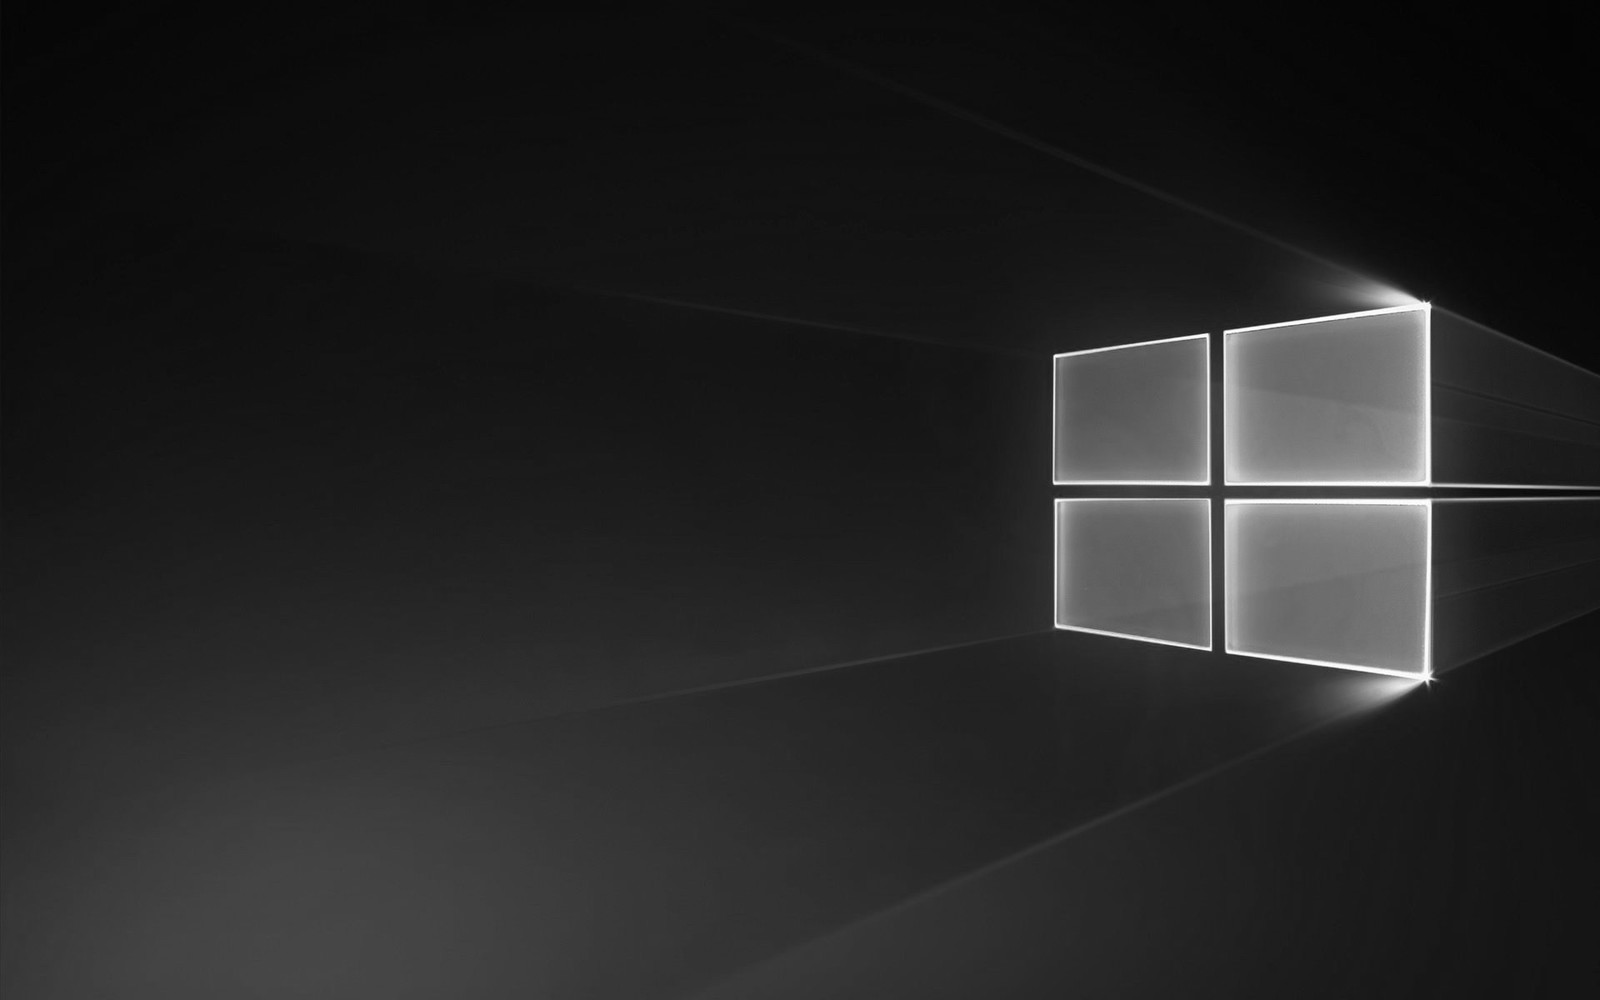 Windows 10 October Update (Redstone 5) is all set to be released in October